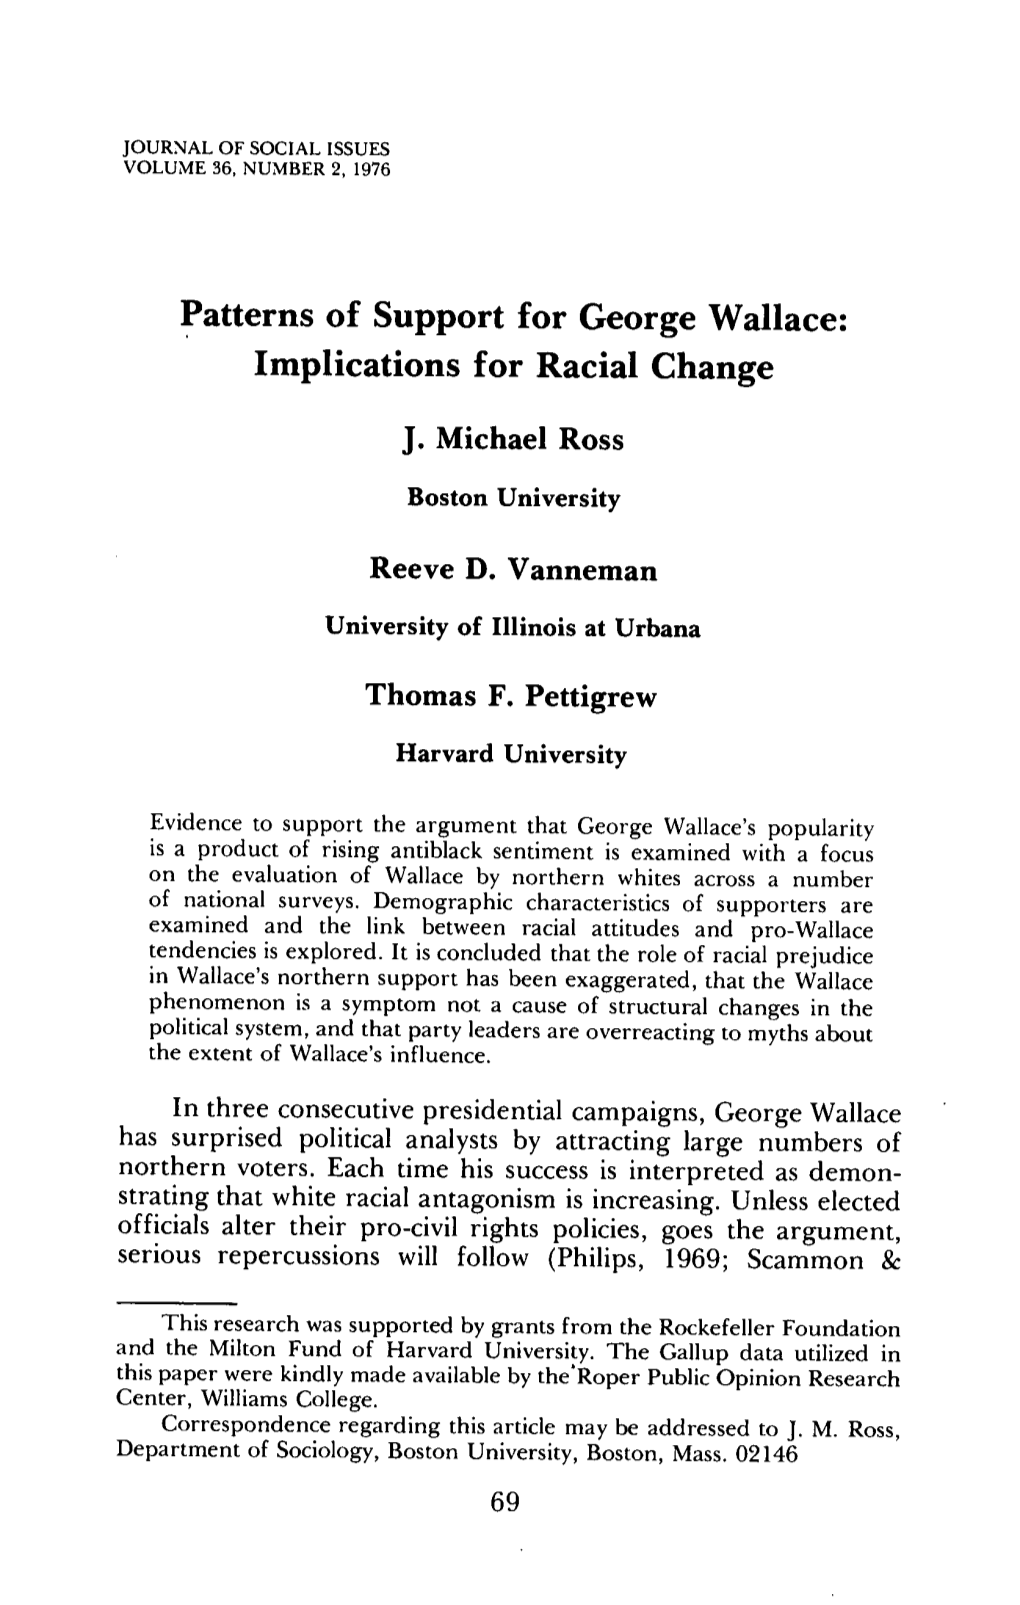 Patterns of Support for George Wallace: Implications for Racial Change J